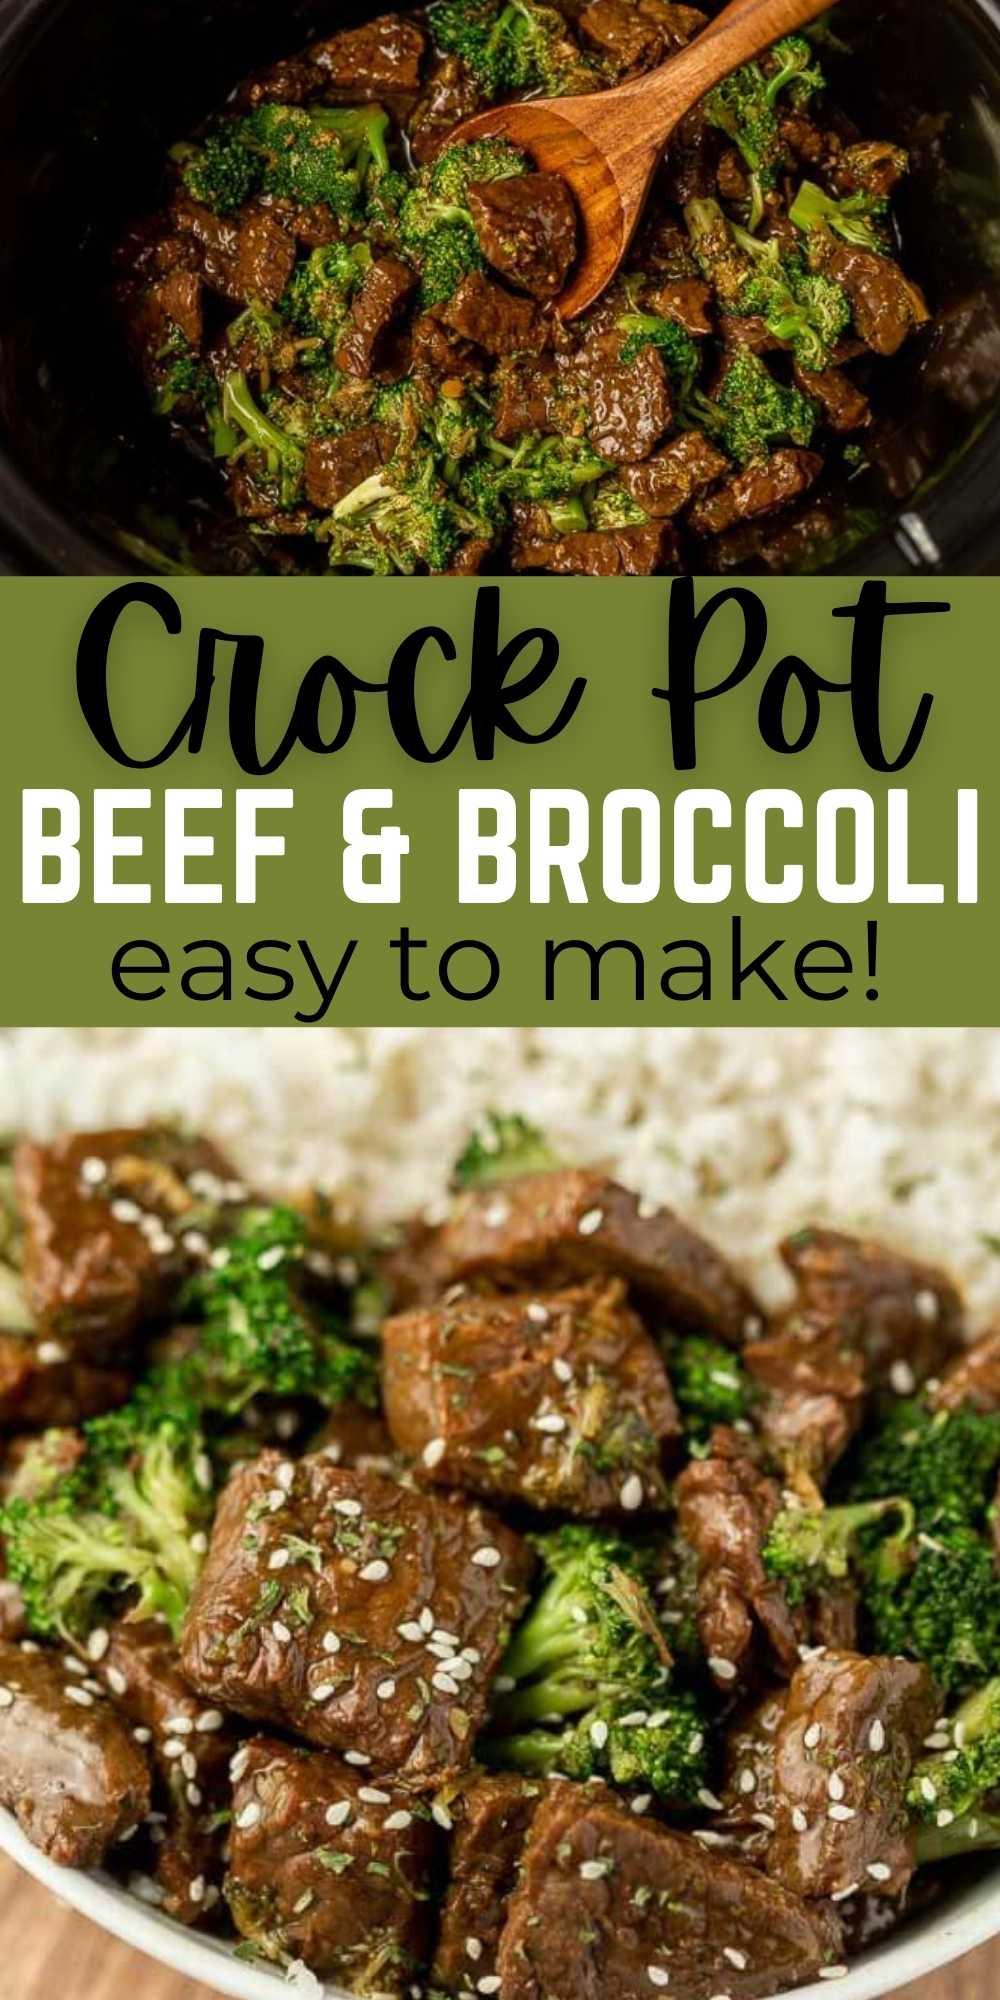 Beef and Broccoli Crock Pot Recipe is a great meal idea that is healthy and delicious. Let the crockpot do all the work for a weeknight meal. You will love this super easy slow cooker beef and broccoli stir fry recipe. #eatingonadime #crockpotrecipes #slowcookerrecipes #beefrecipes #asianrecipes 
